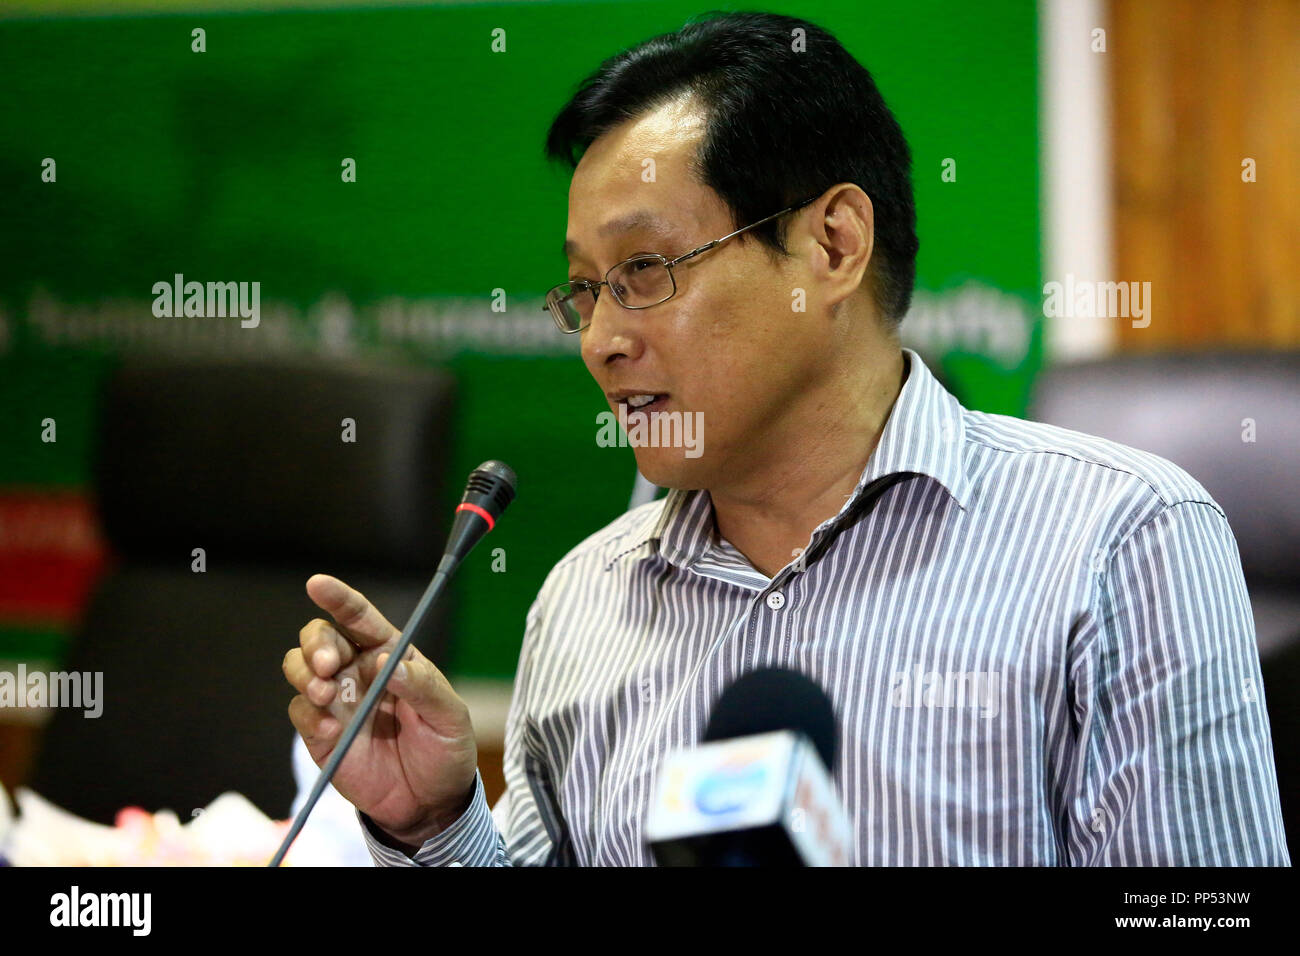 Khartoum, Sudan. 23rd Sep, 2018. Zhang Lei, a leading Chinese cotton breeding expert, speaks at the workshop in Khartoum, Sudan, on Sept. 23, 2018. Chinese and Sudanese agricultural experts held a workshop on Sunday in Khartoum, capital of Sudan, to promote cotton breeding and seeds production in the African country. Credit: Mohamed Khidir/Xinhua/Alamy Live News Stock Photo